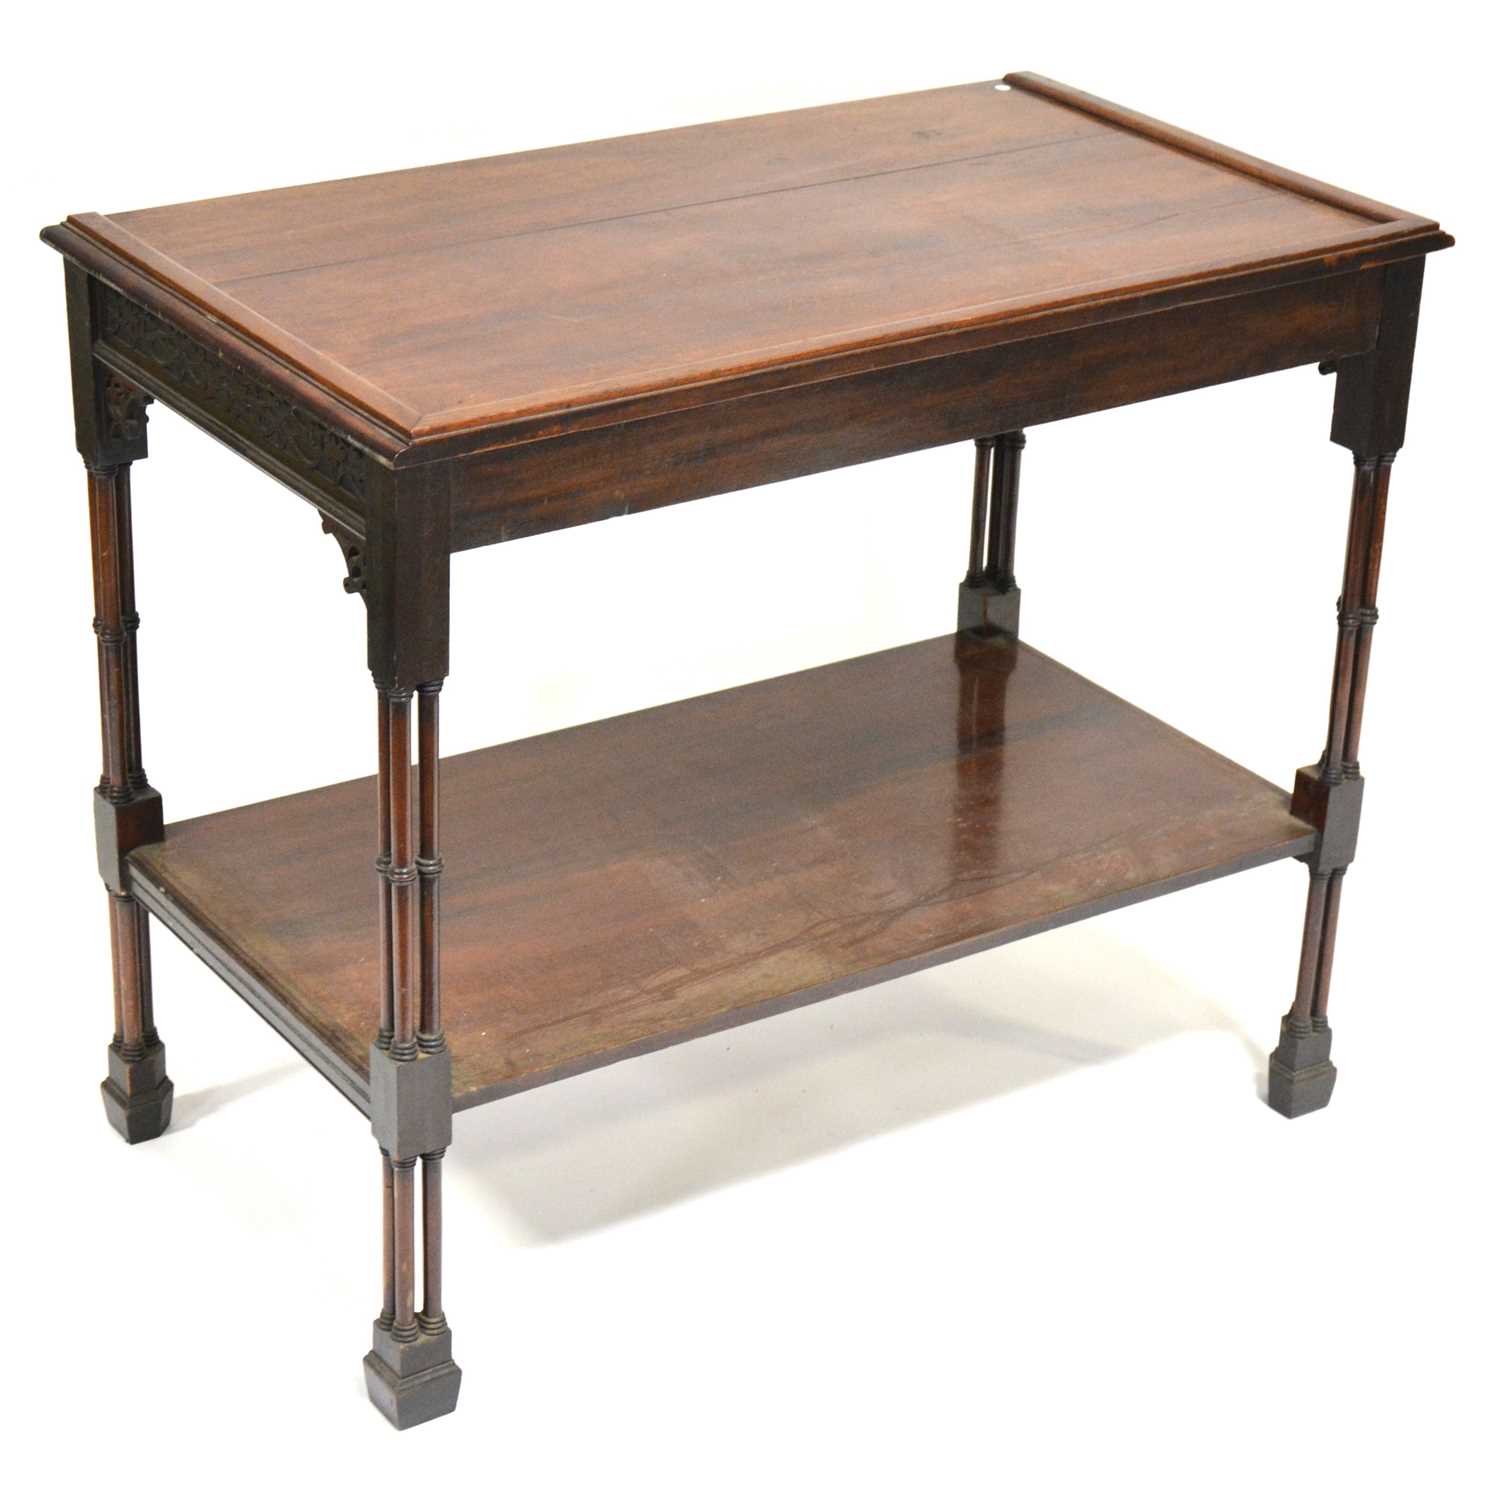 Mahogany side or silver table,